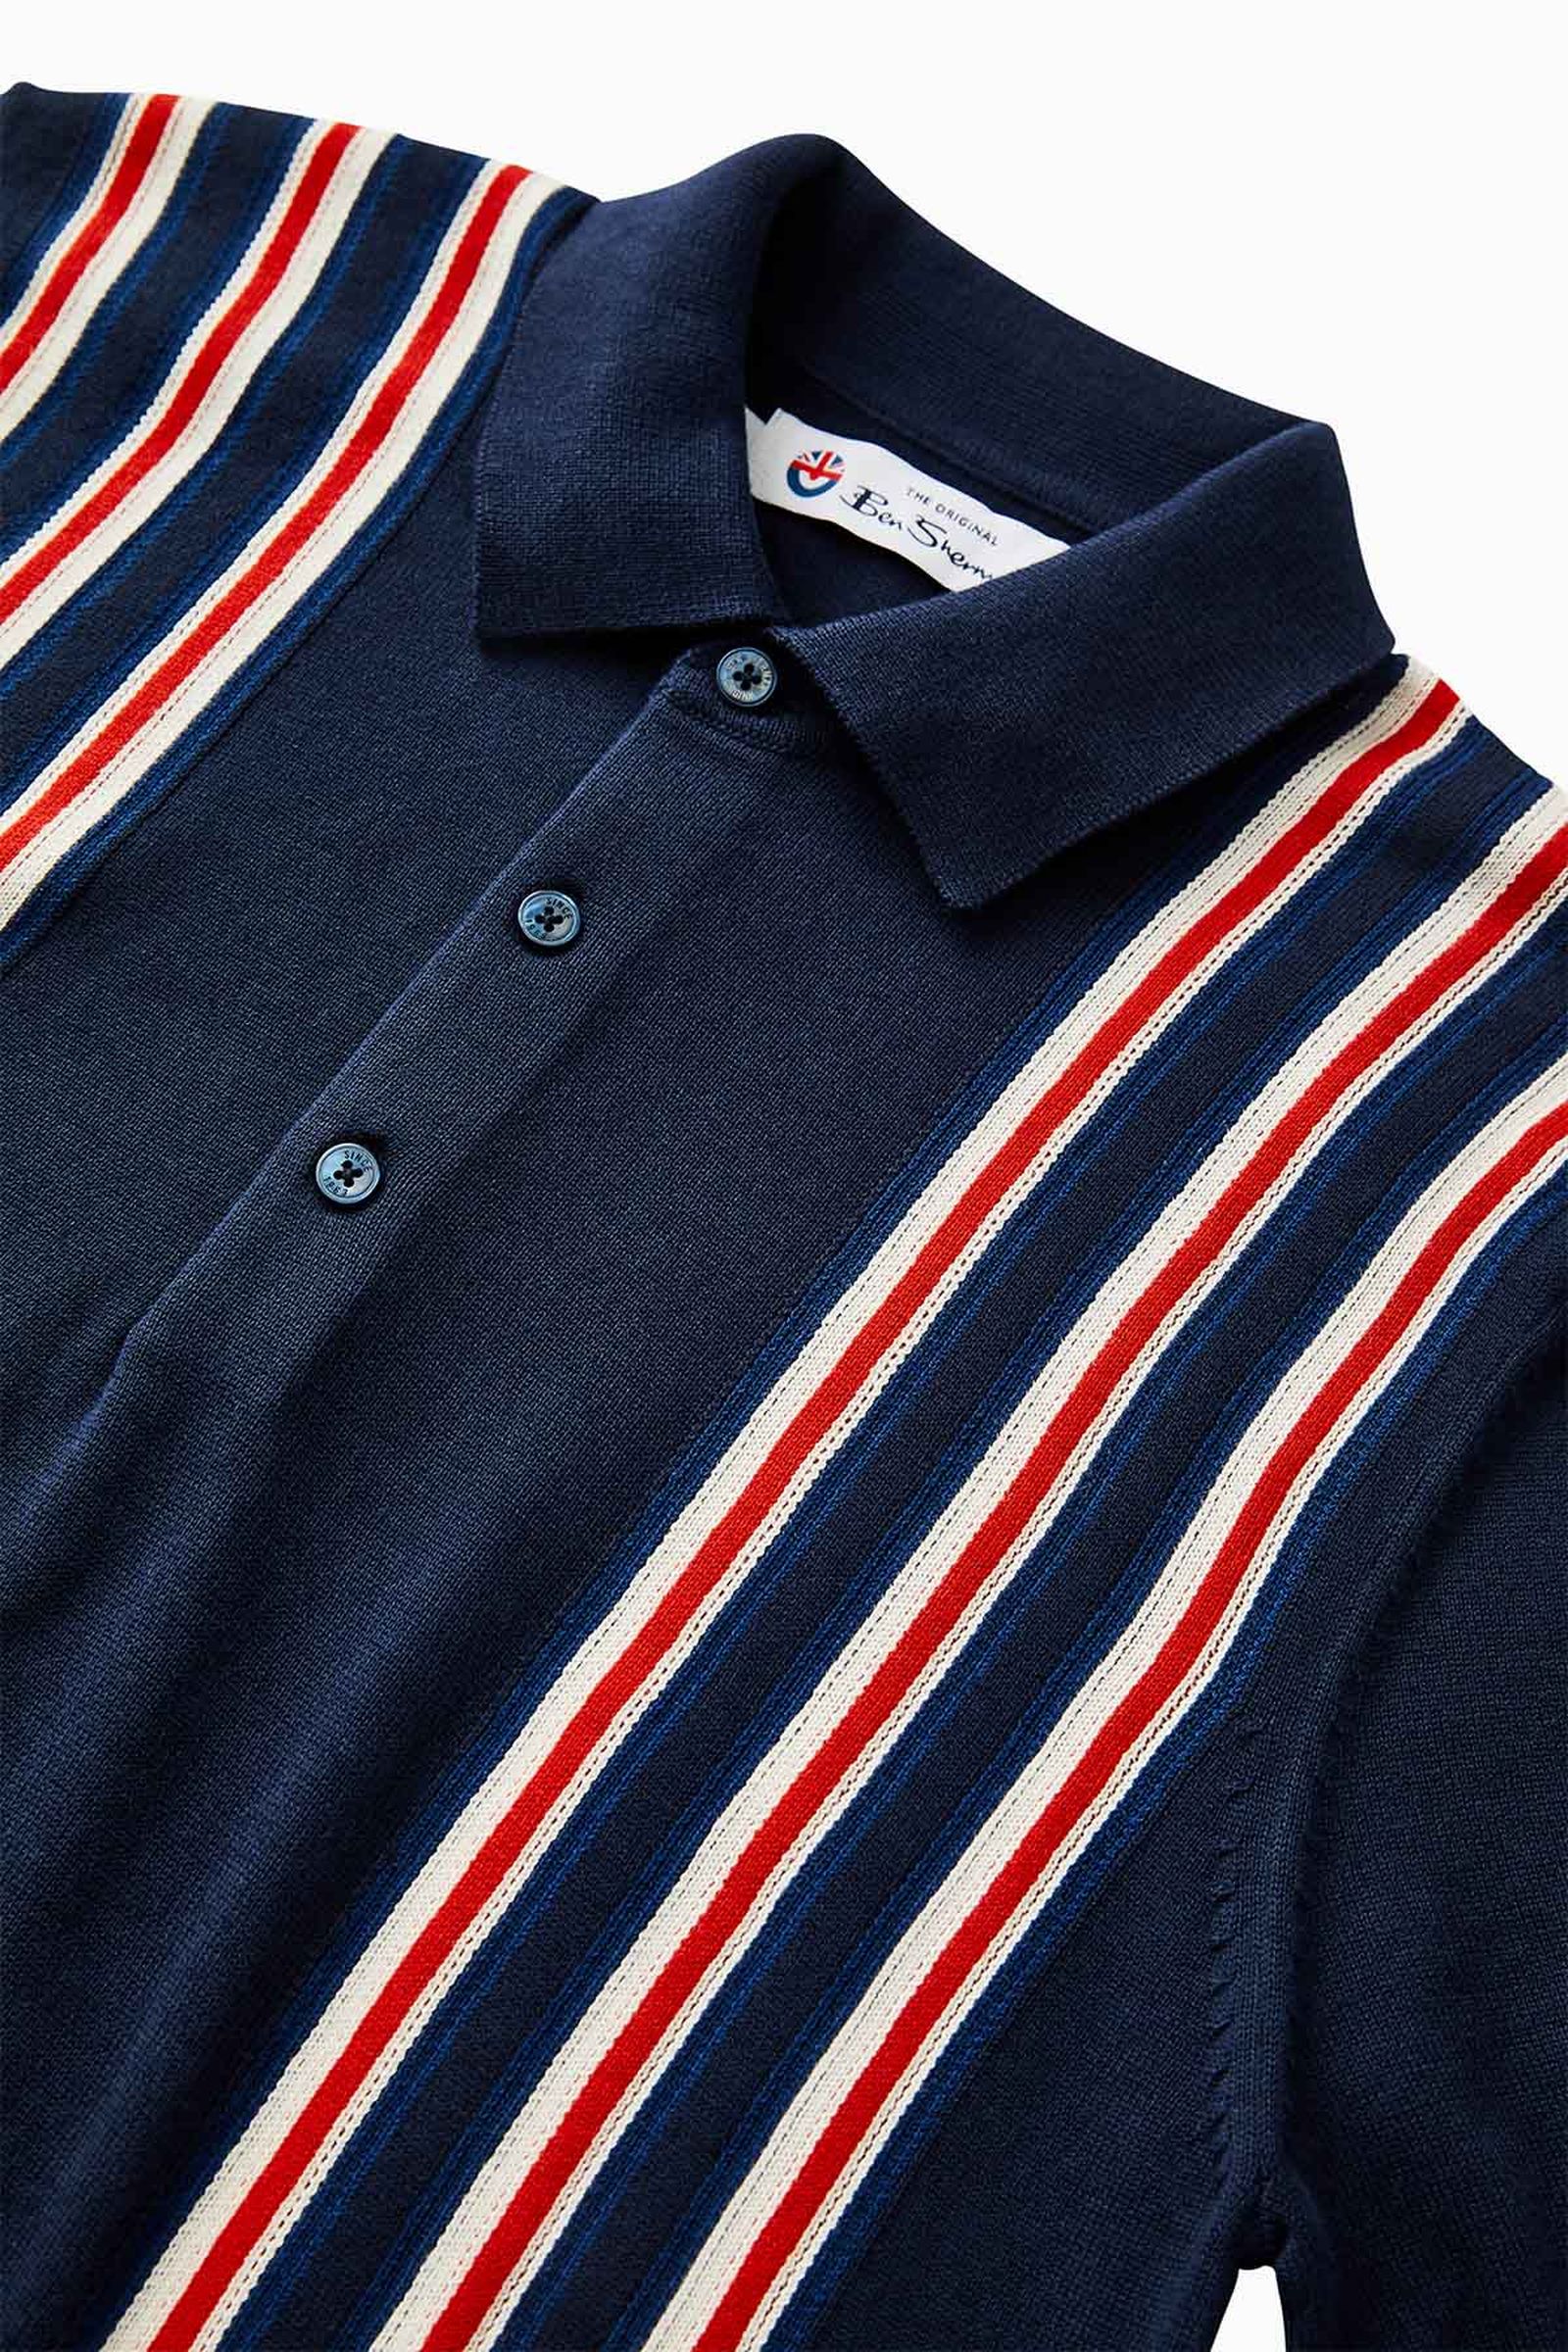 Ben Sherman Drops Team GB Collection Ahead of Tokyo Olympic Games